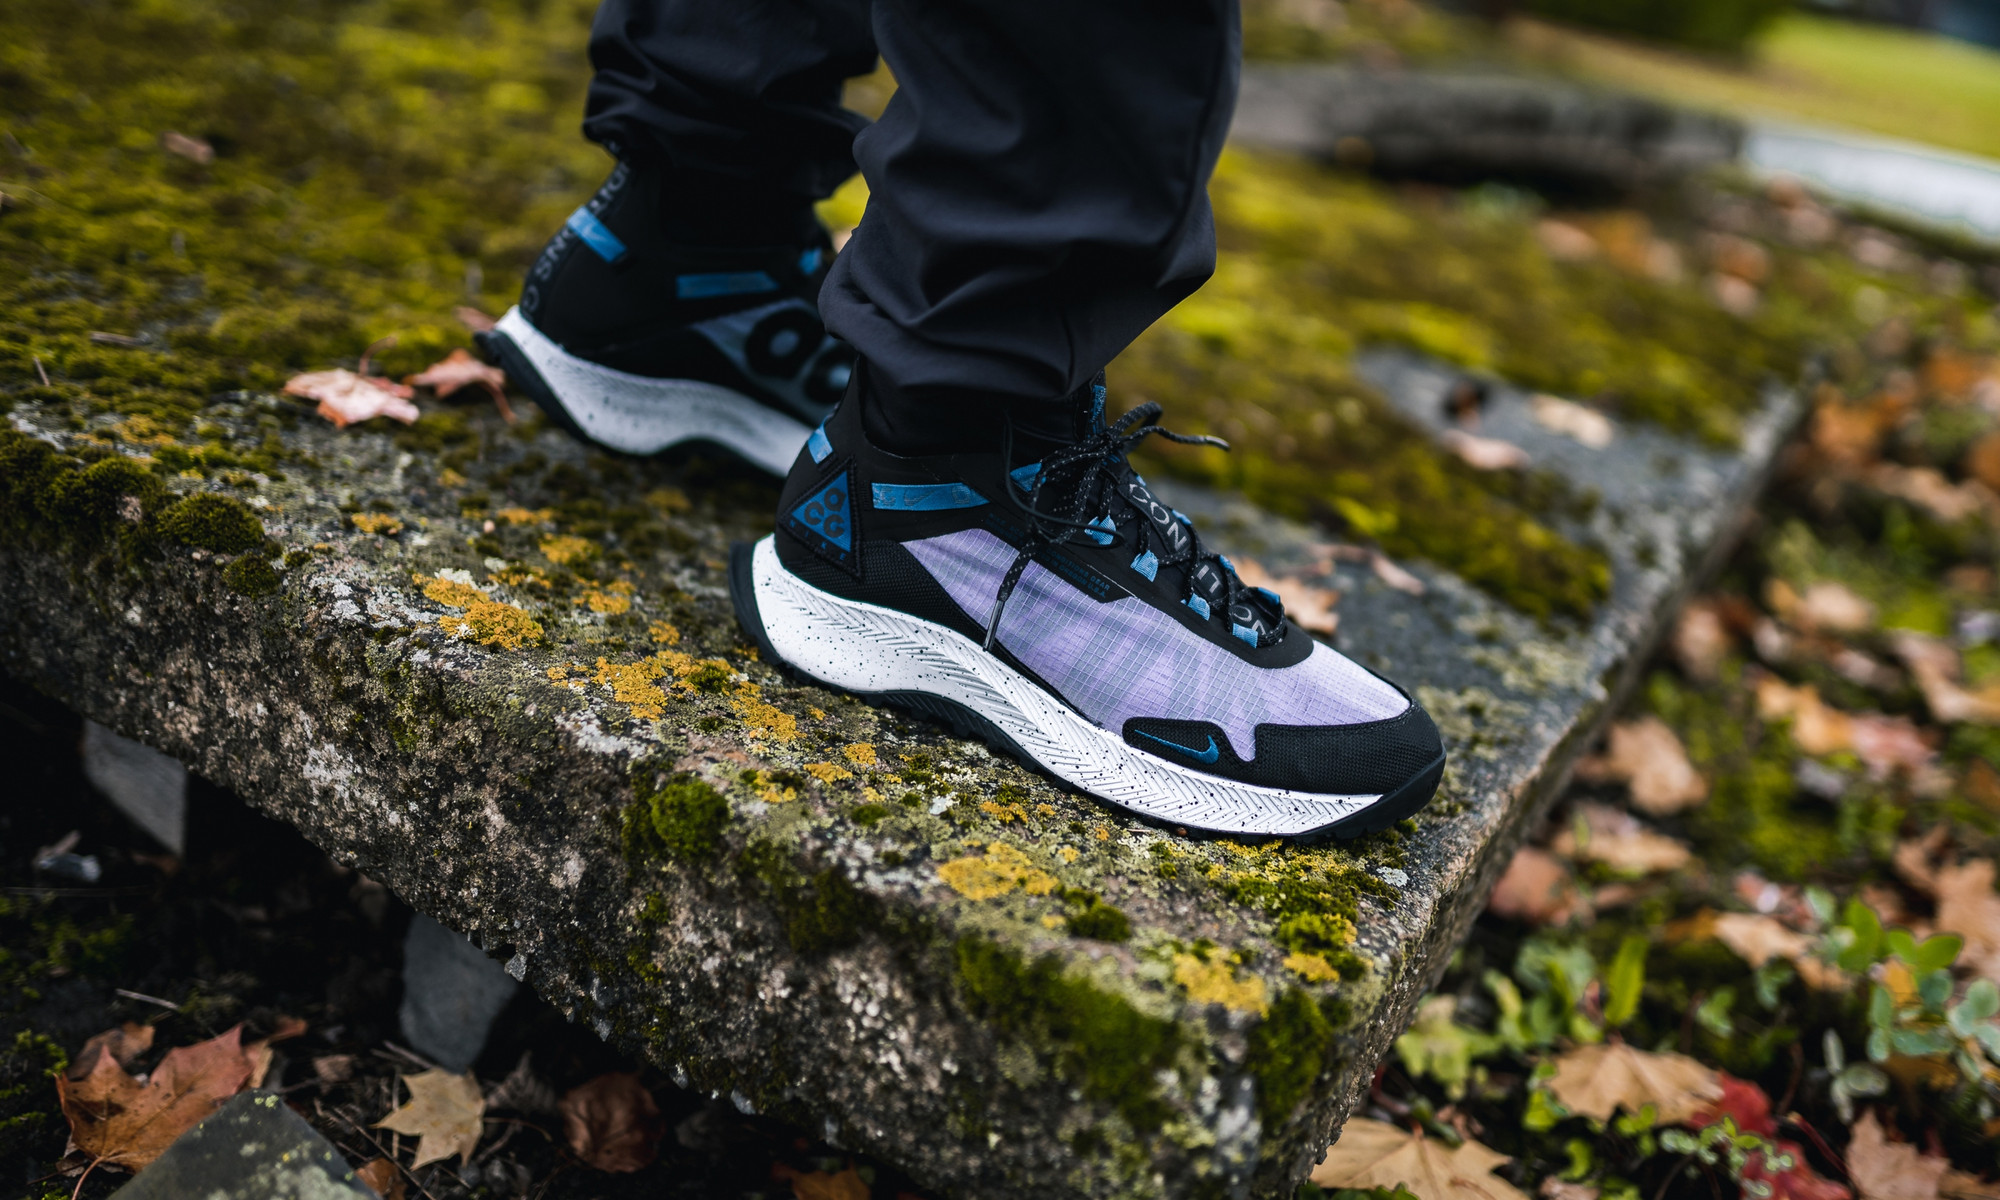 Subjetivo superficial mucho تويتر \ Kicks Deals Canada على تويتر: "A comfy and reliable pair of hikers  that are ready to endure whatever you can throw their way, you won't want  to overlook the comfy